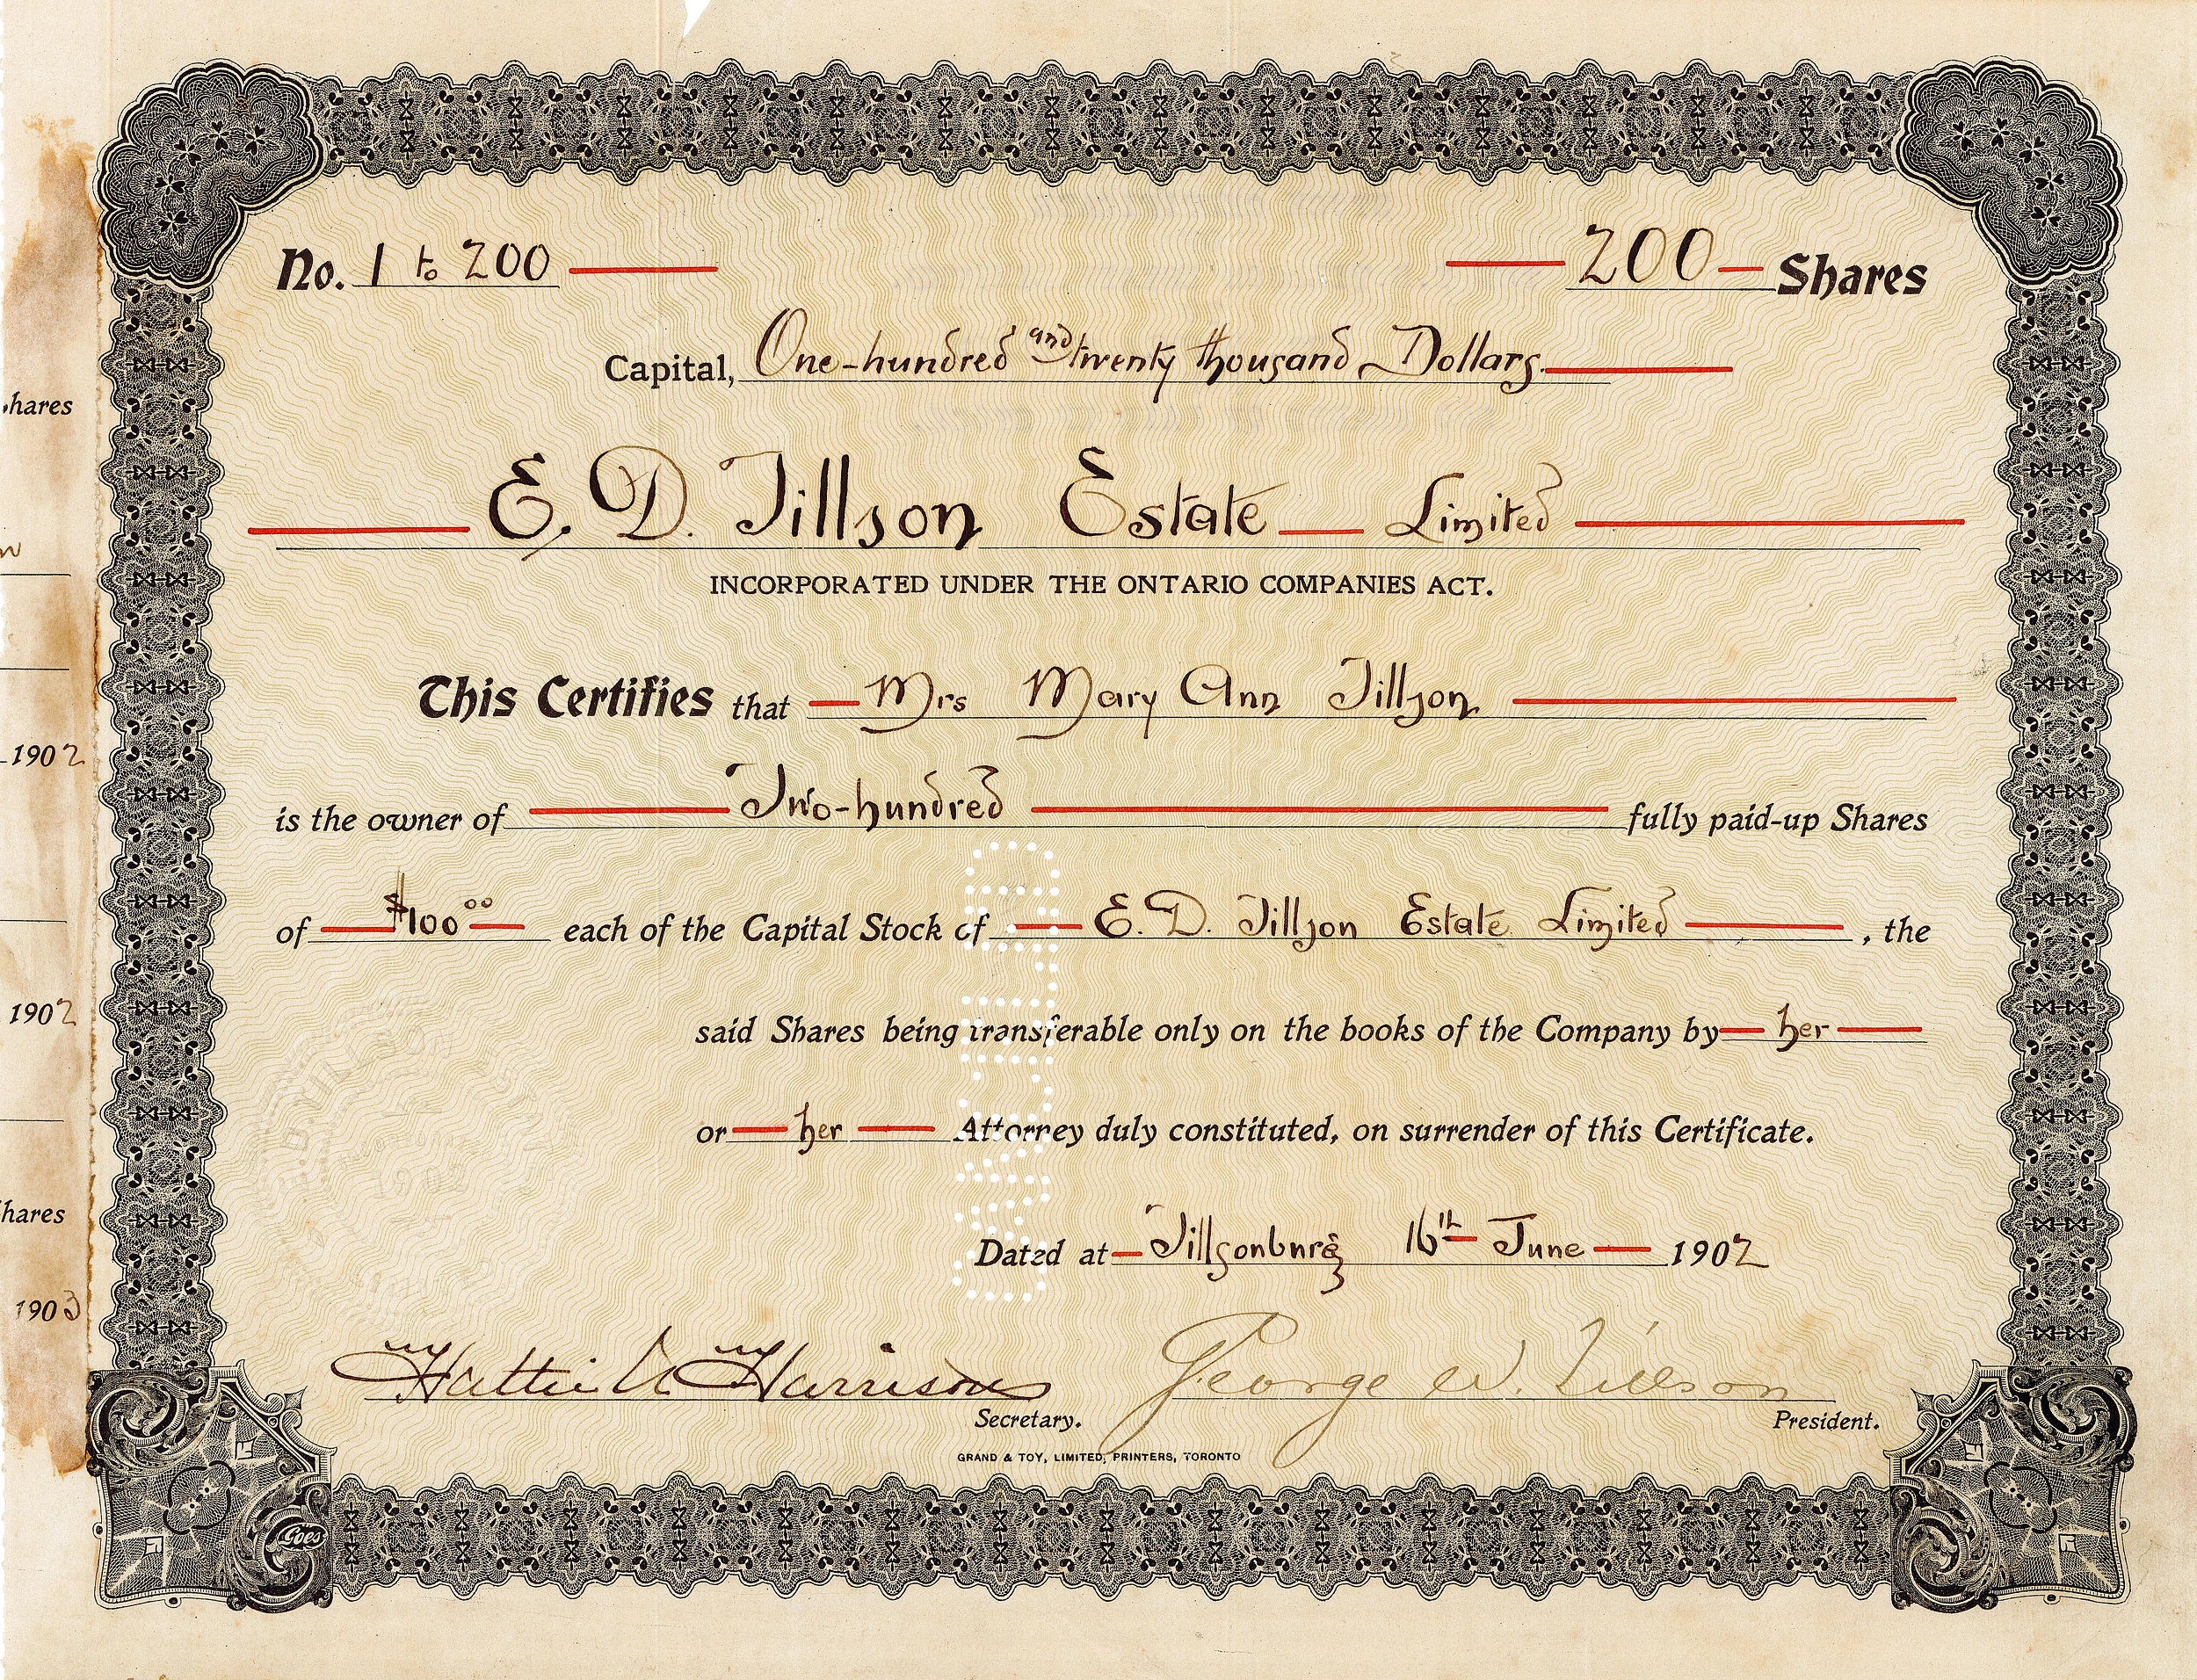 A document certifying that Mary Ann Tillson owns 200 shares of the Capital Stock of  E.D. Tillson Estate Limited. Shares are $100.00 each. Date 16 June, 1902. Document has an ornate black border.